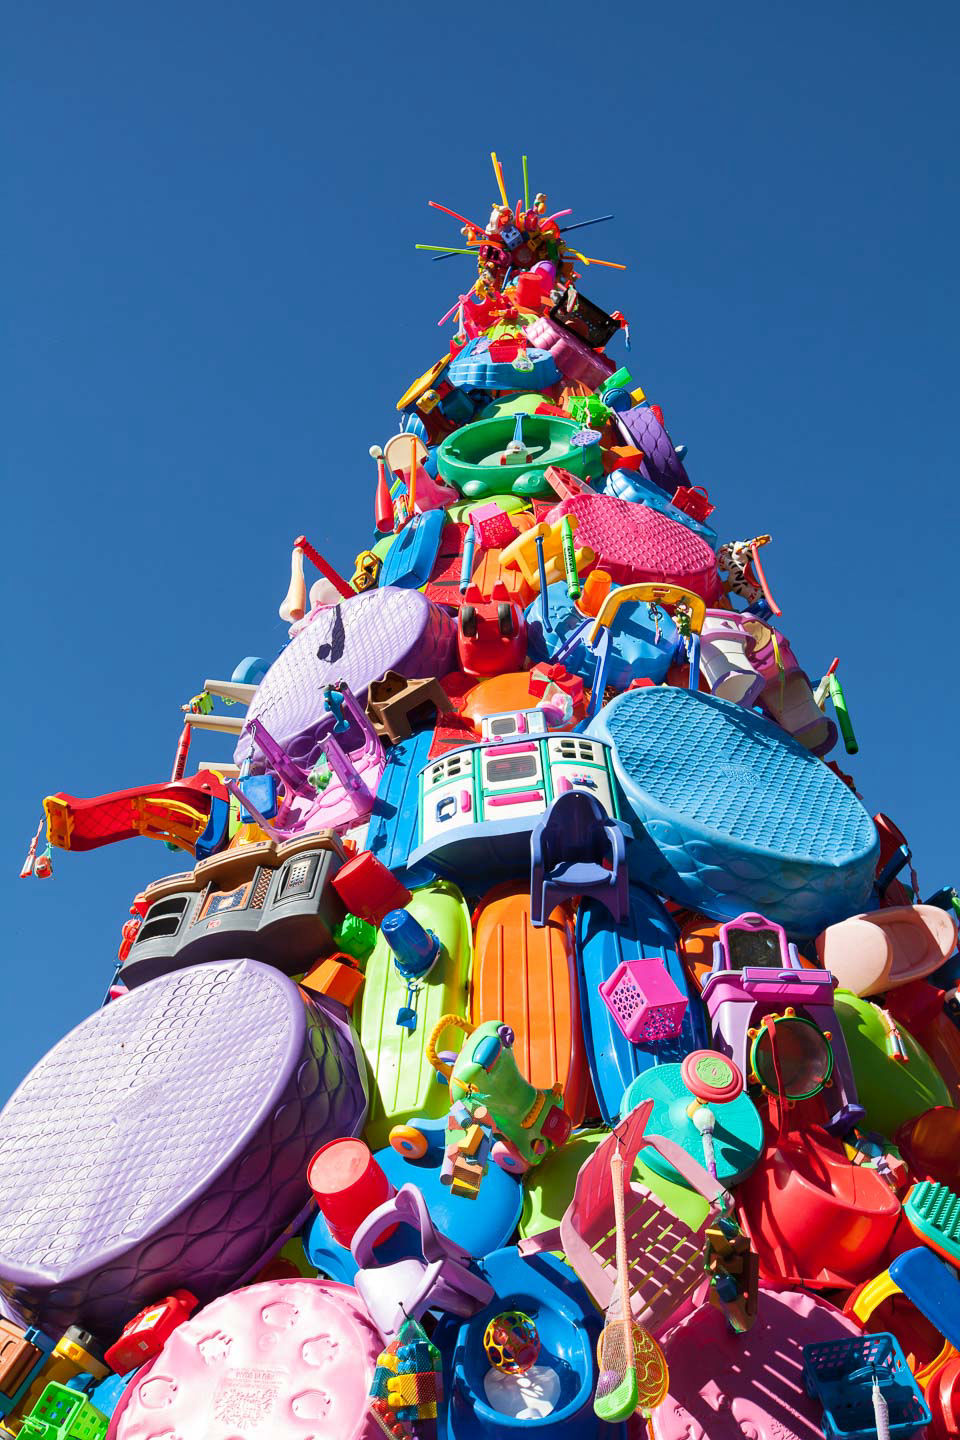 Playtime in Indy - A Holiday Tree Made All of Toys for Newfields by Karl Unnasch, Indianapolis, IN. Photo: Eric Lubrick